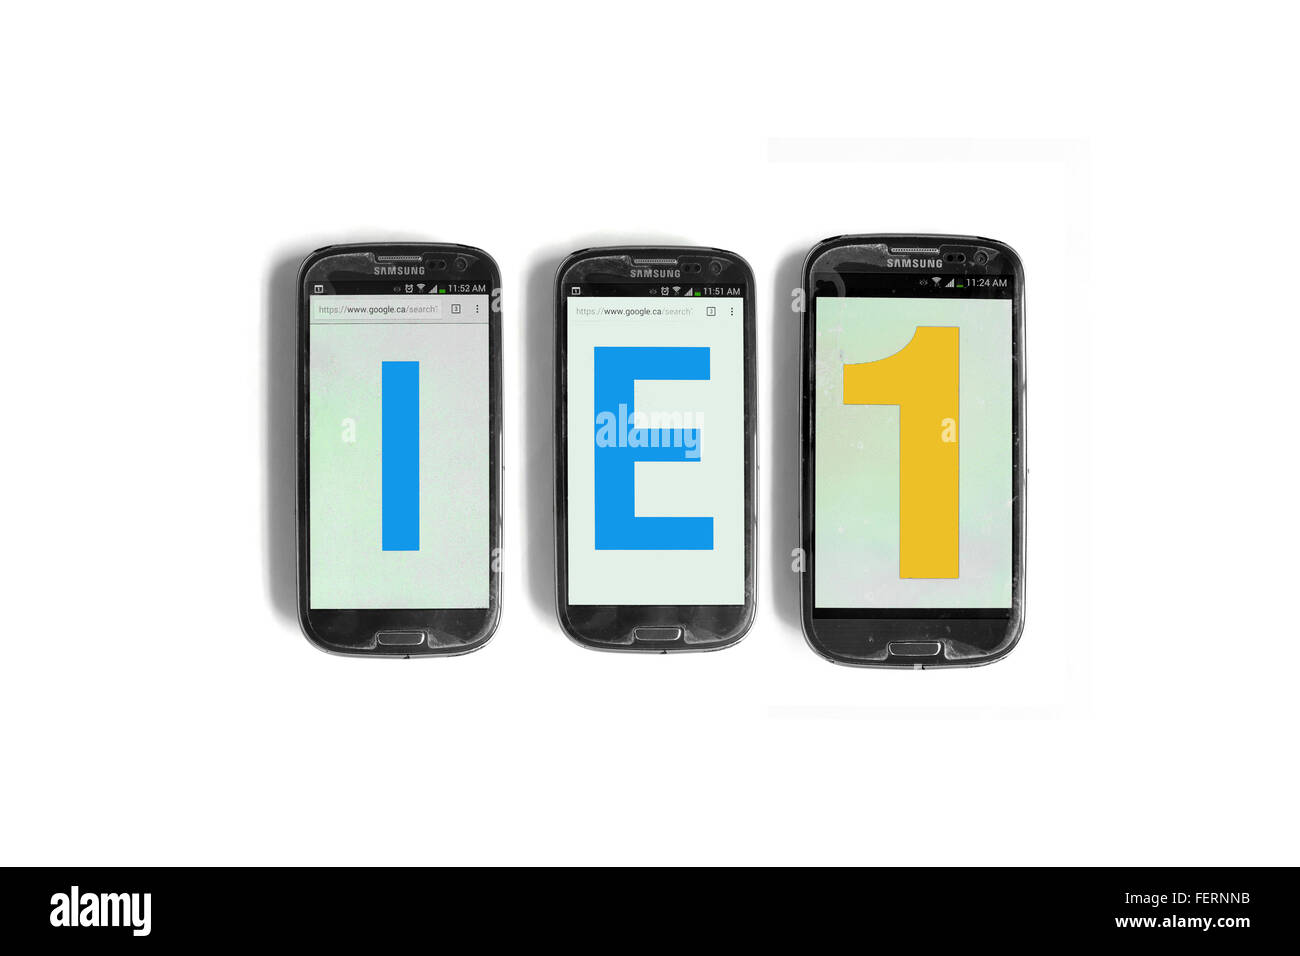 IE1 on the screens of smartphones photographed against a  white background. Stock Photo